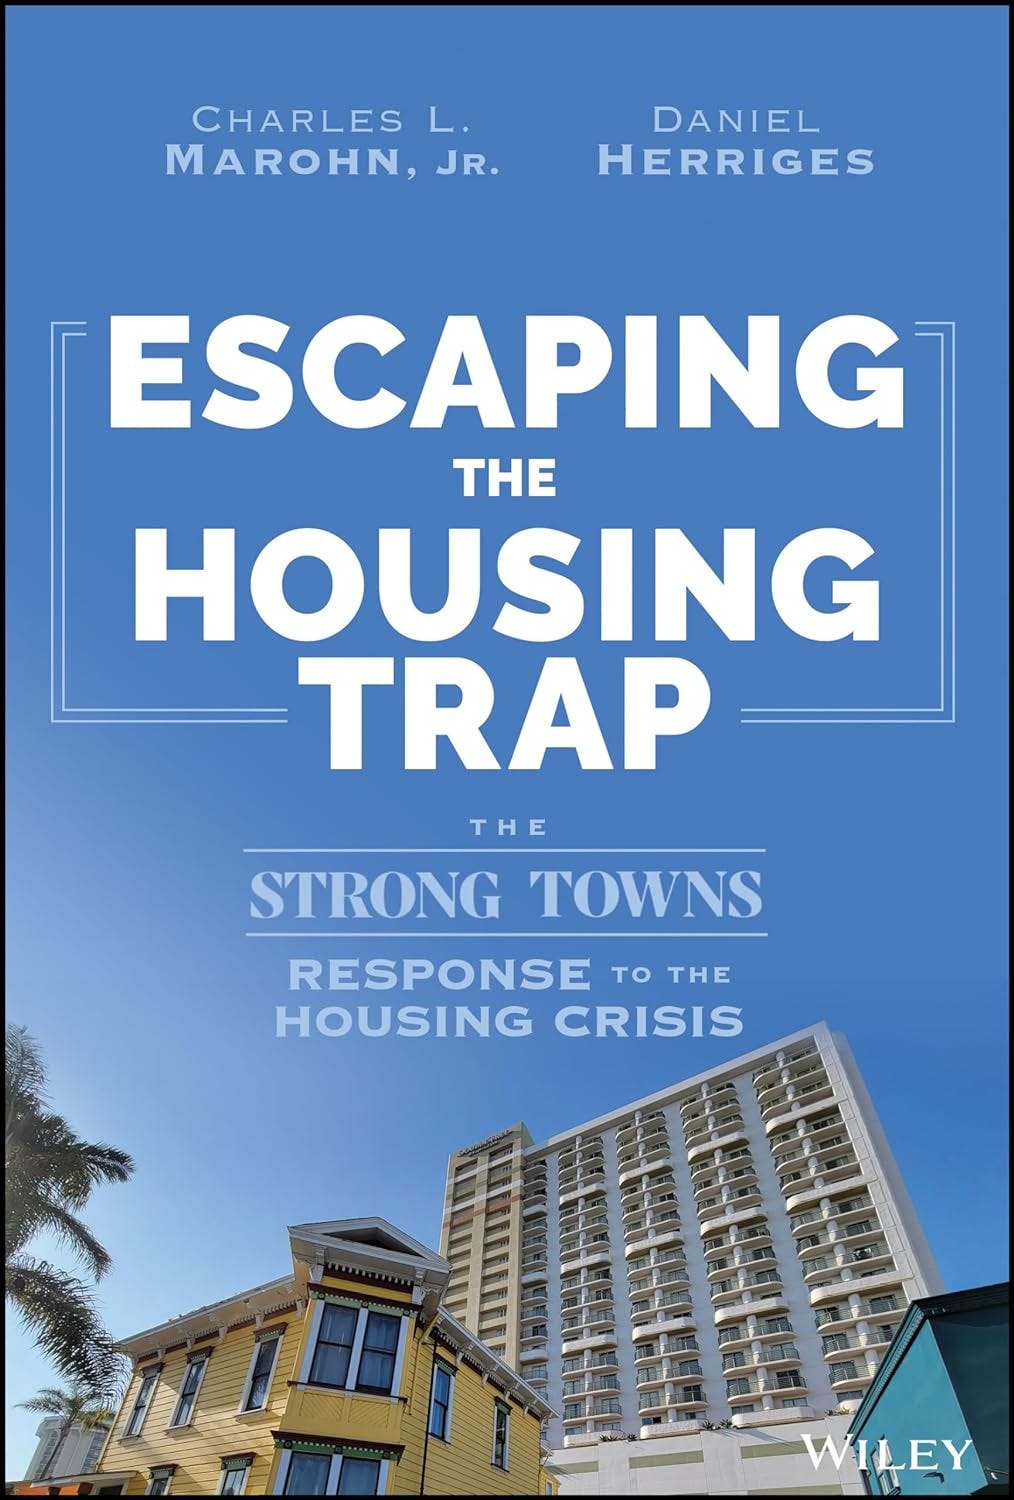 PDF Escaping the Housing Trap: The Strong Towns Response to the Housing Crisis By Charles L. Marohn Jr.